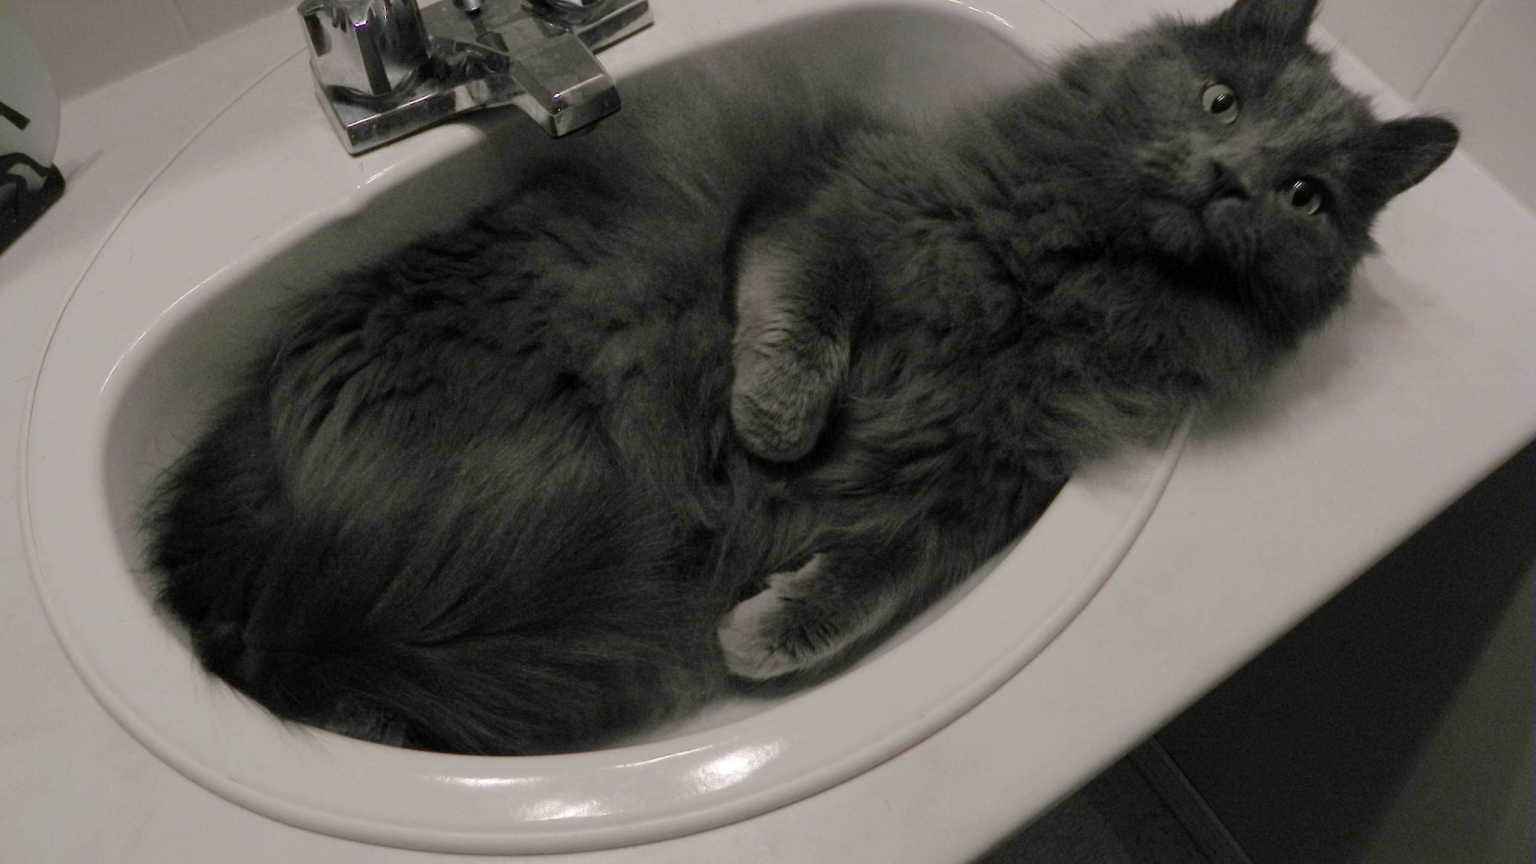 Nebelung Cat in Sink for 1536 x 864 HDTV resolution